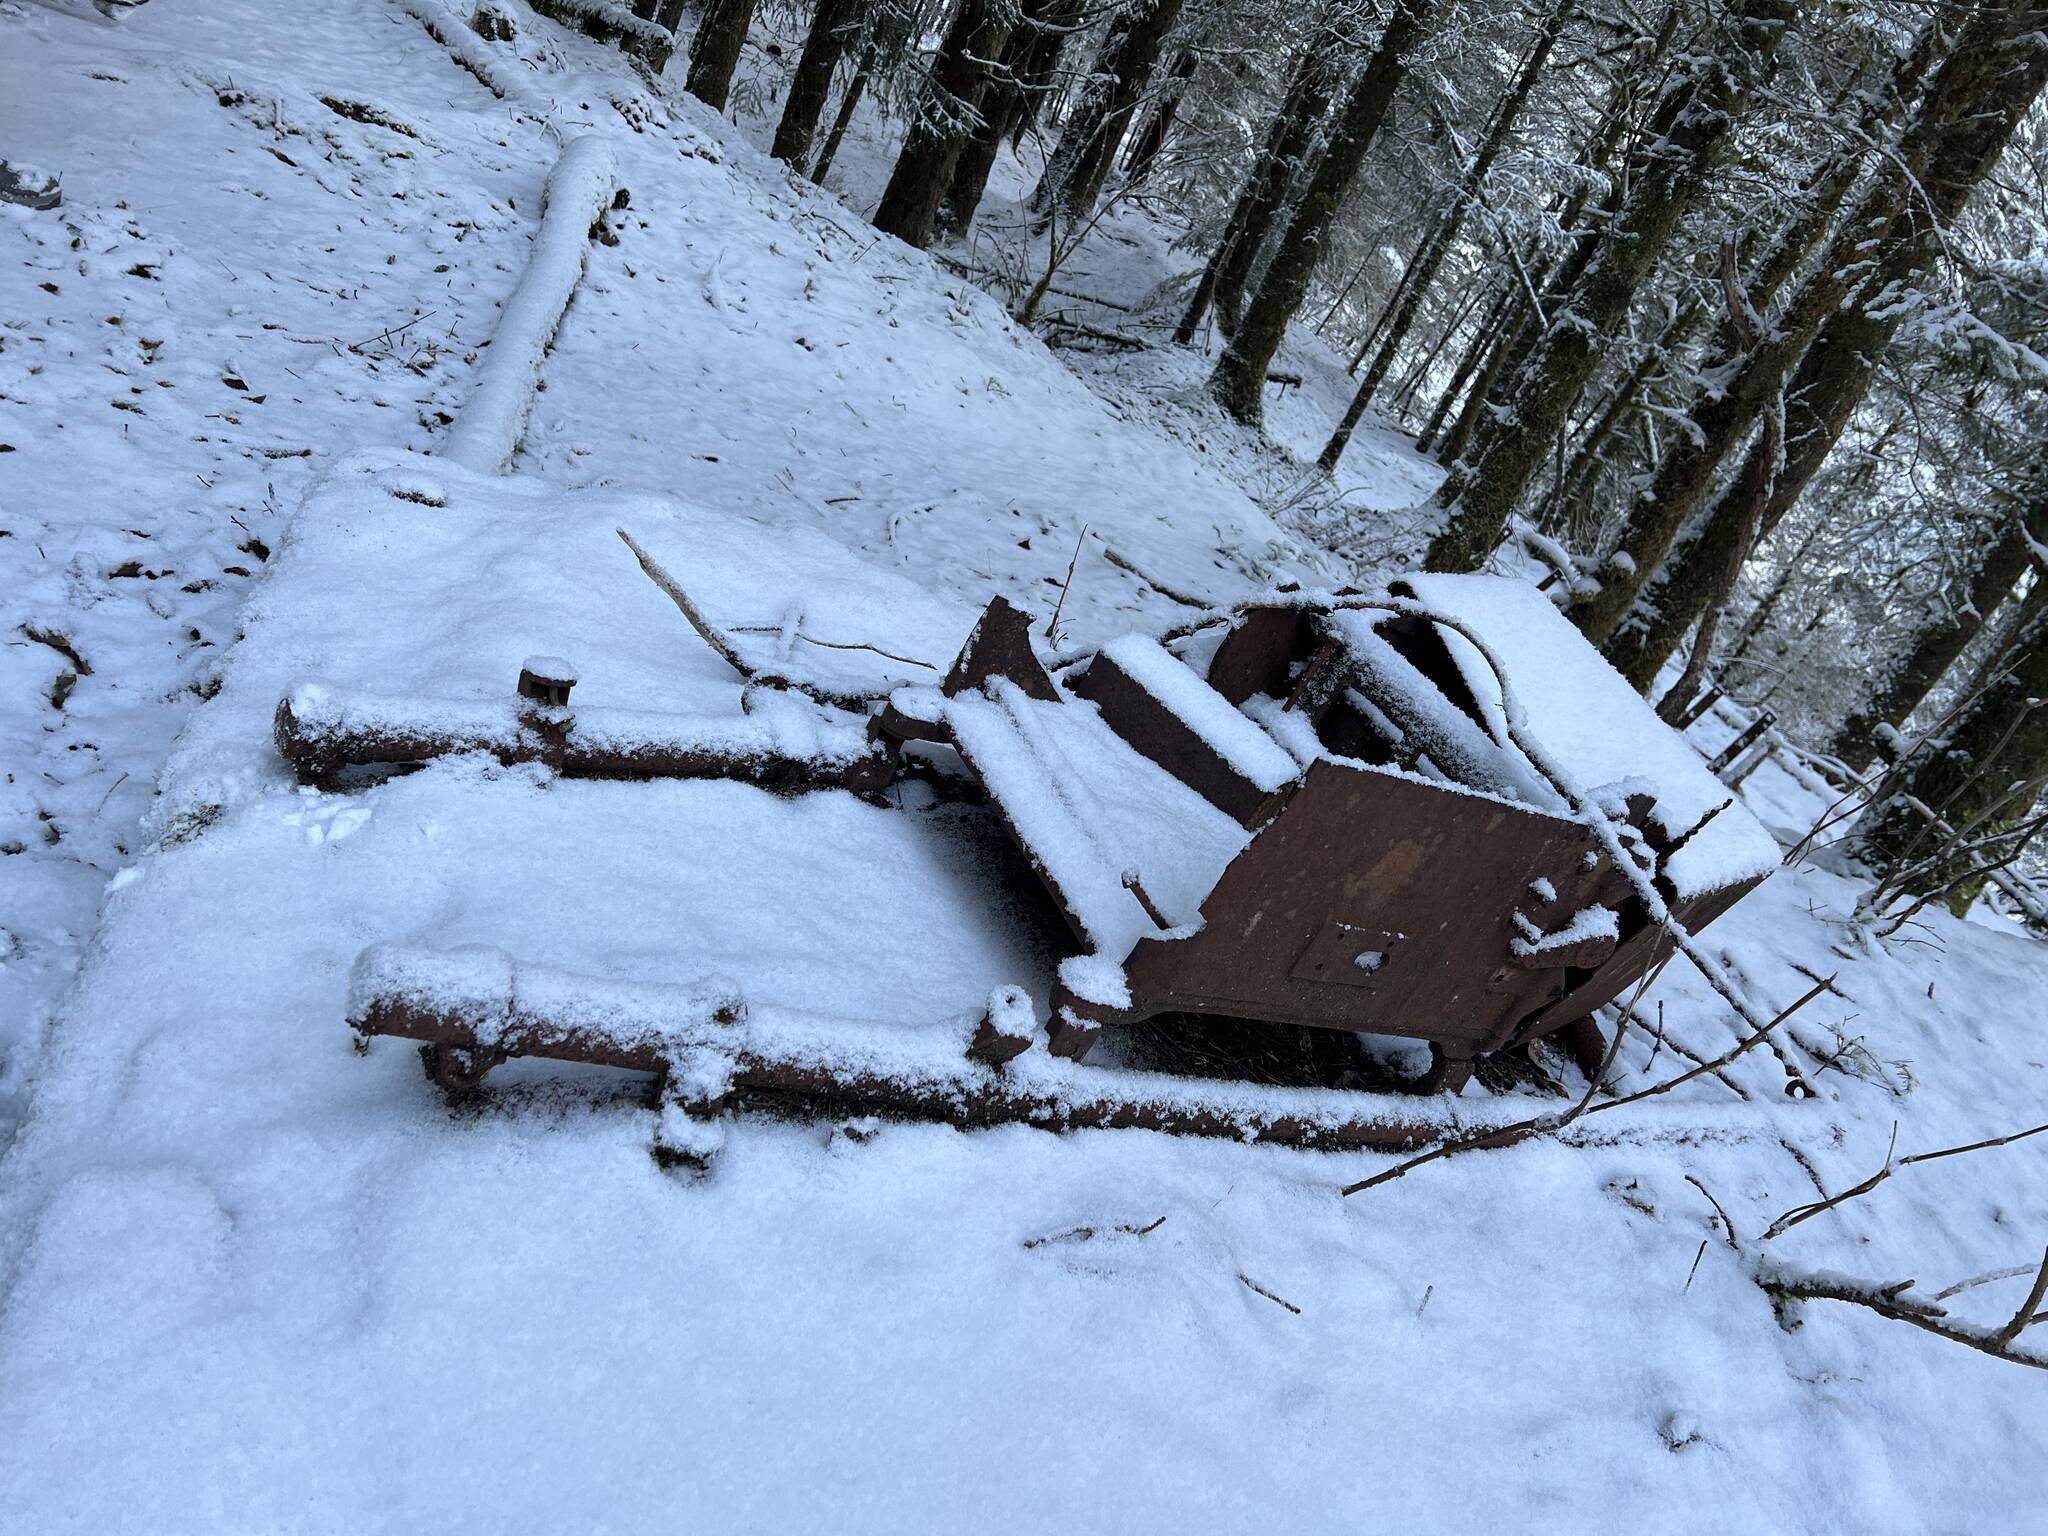 "Santa’s sleigh needs some maintenance before it’s ready for Christmas Eve," writes Deana Barajas of this photo taken along the Treadwell Mine Trail. (Courtesy Photo / Deana Barajas)